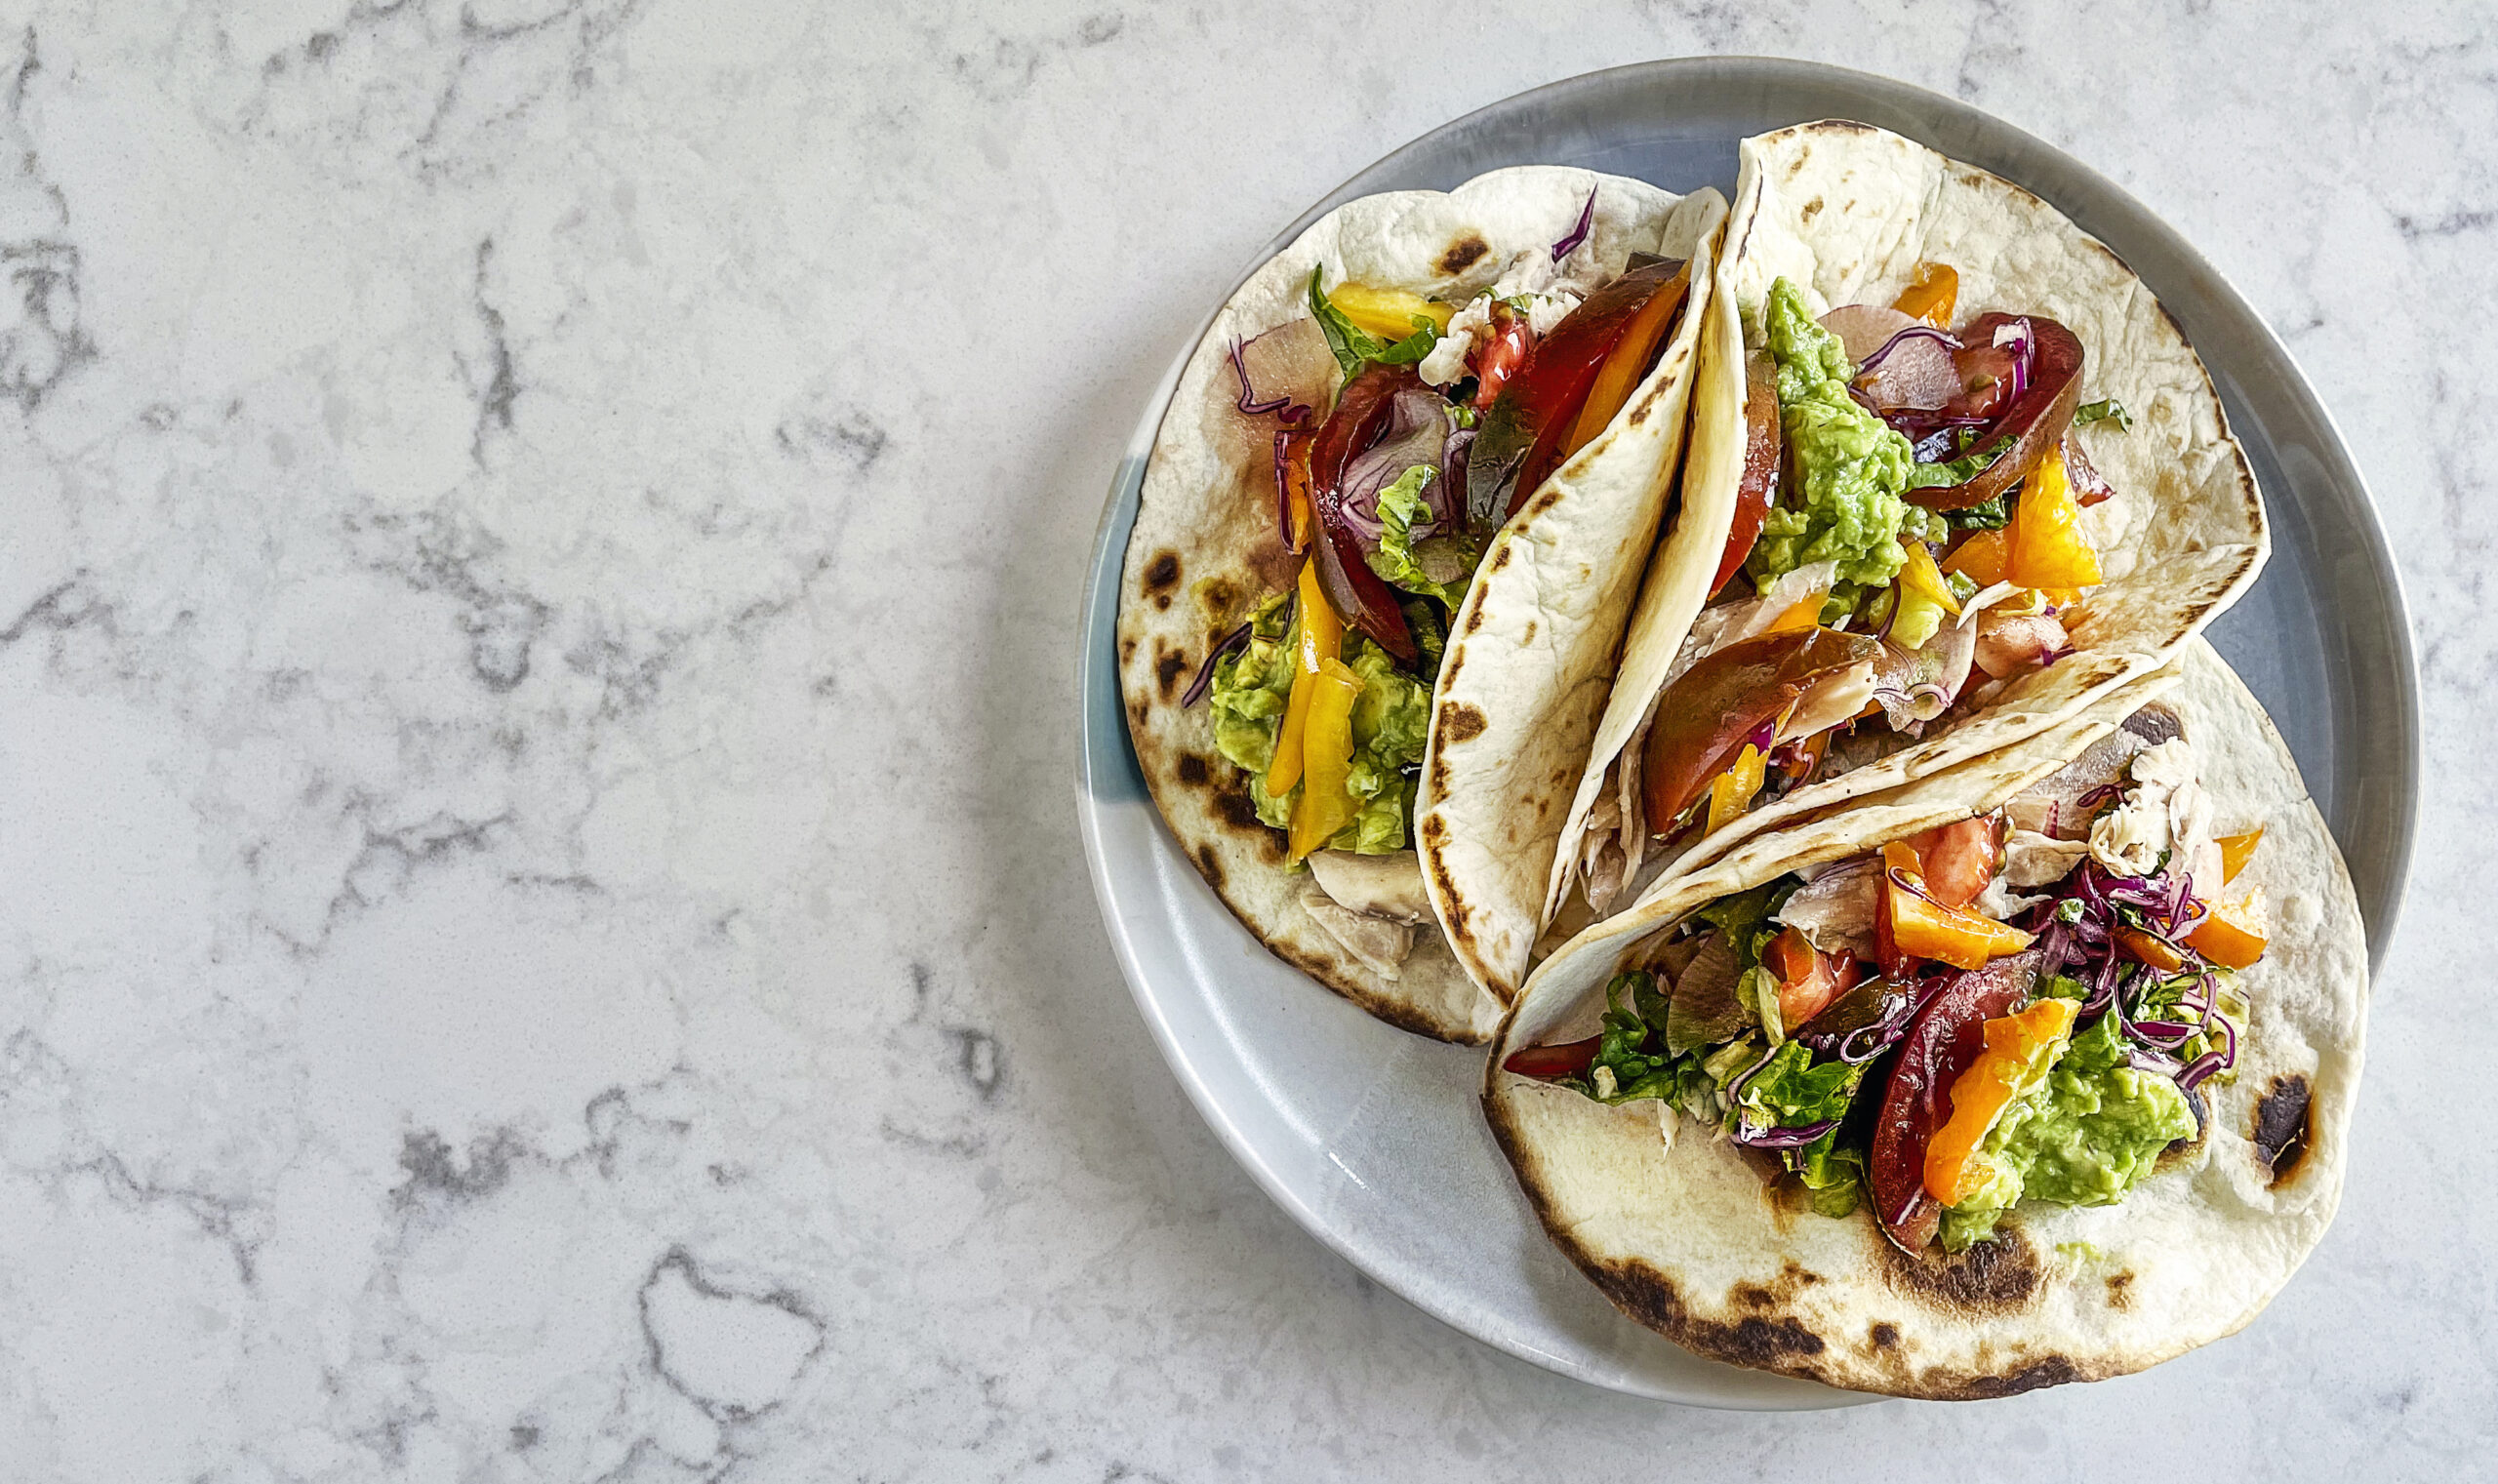 plate of tacos sitting on marble countertop